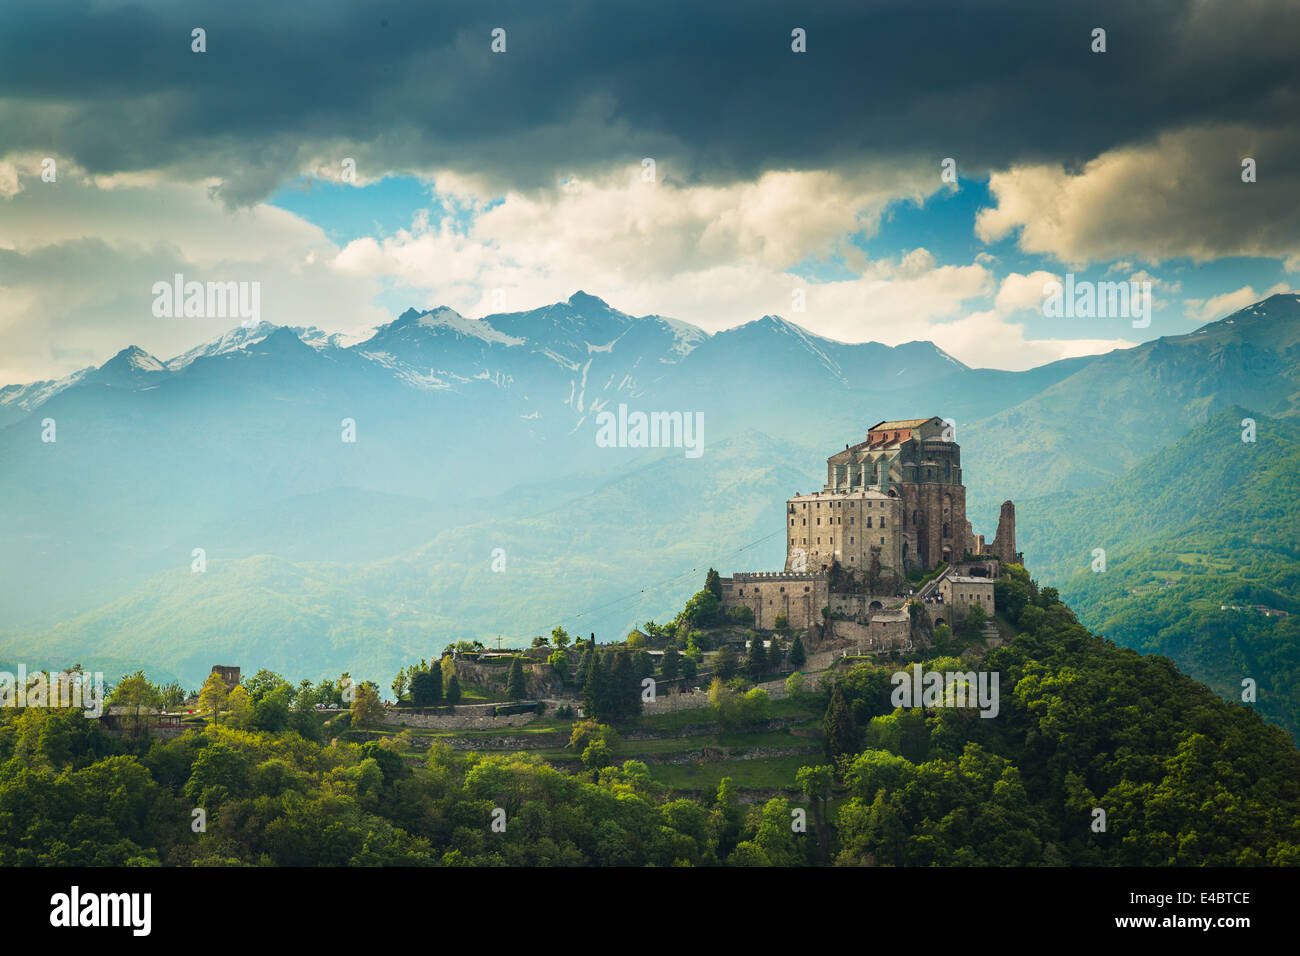 Tthe monastery church of Sacra di San Michele in the Susa Valley, Italy. The Alps rise up in the background with Rocciamelone the most prominent peak. Stock Photo